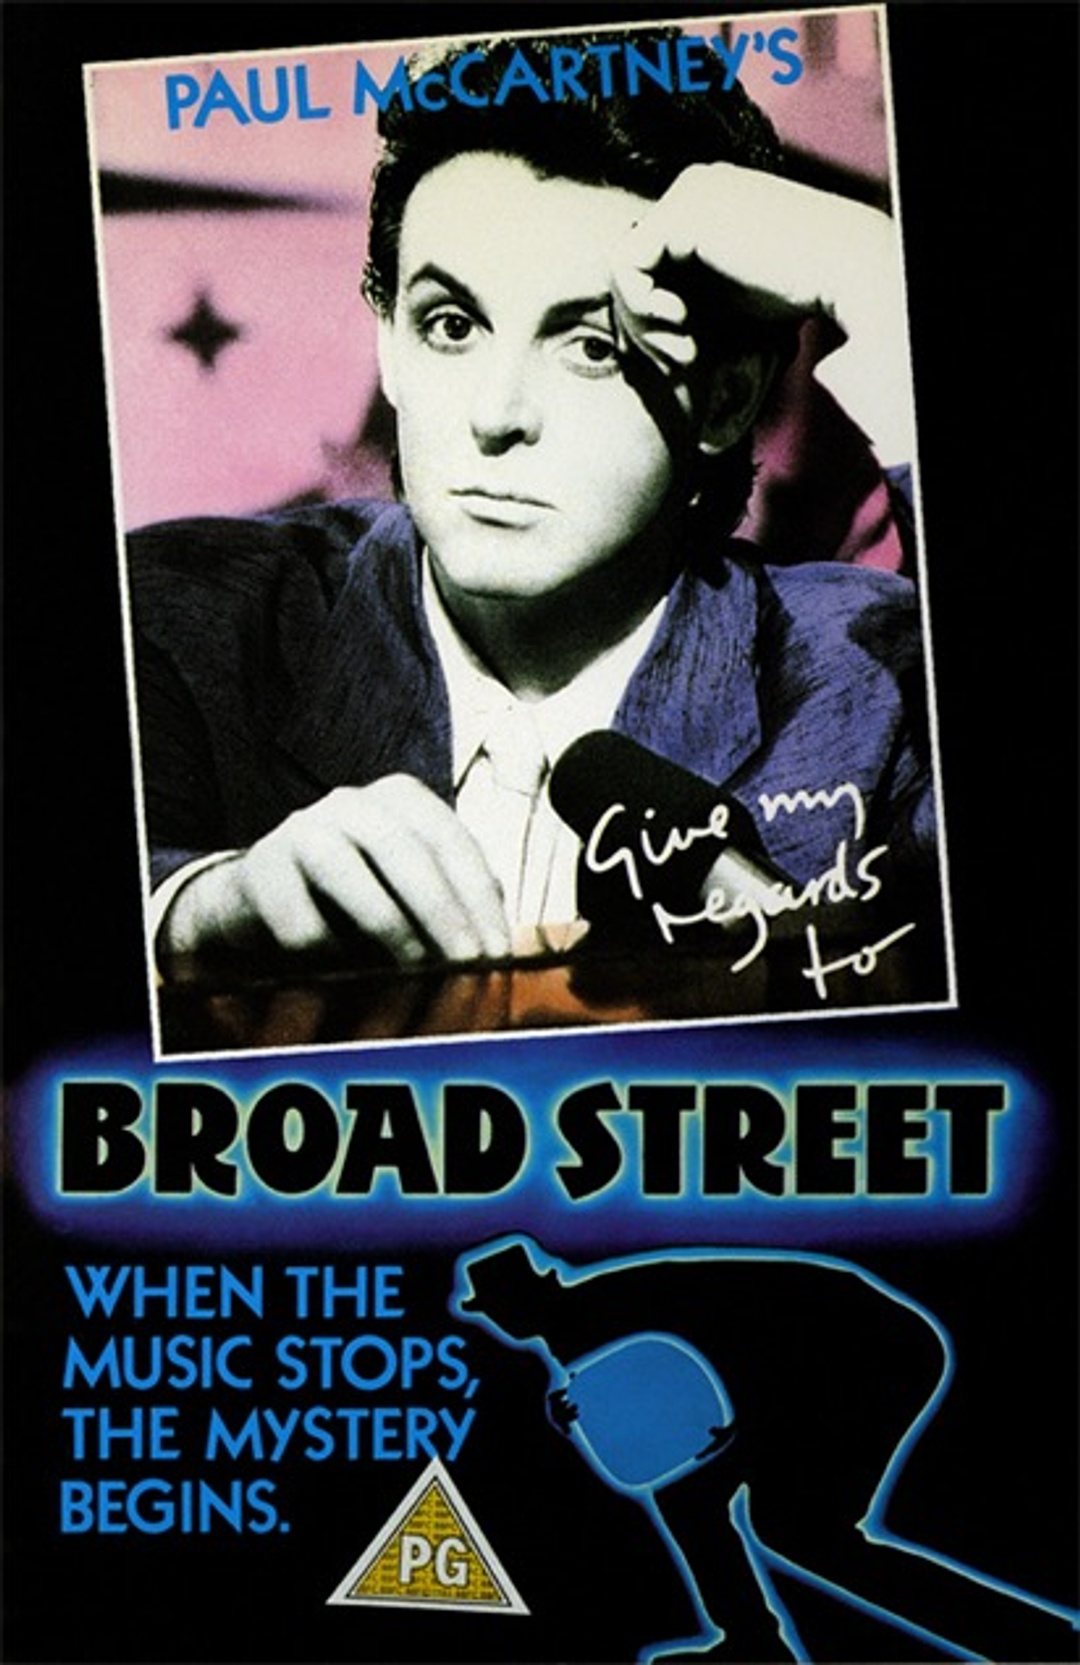 Film cover for Paul McCartney's Give My Regards To Broad Street